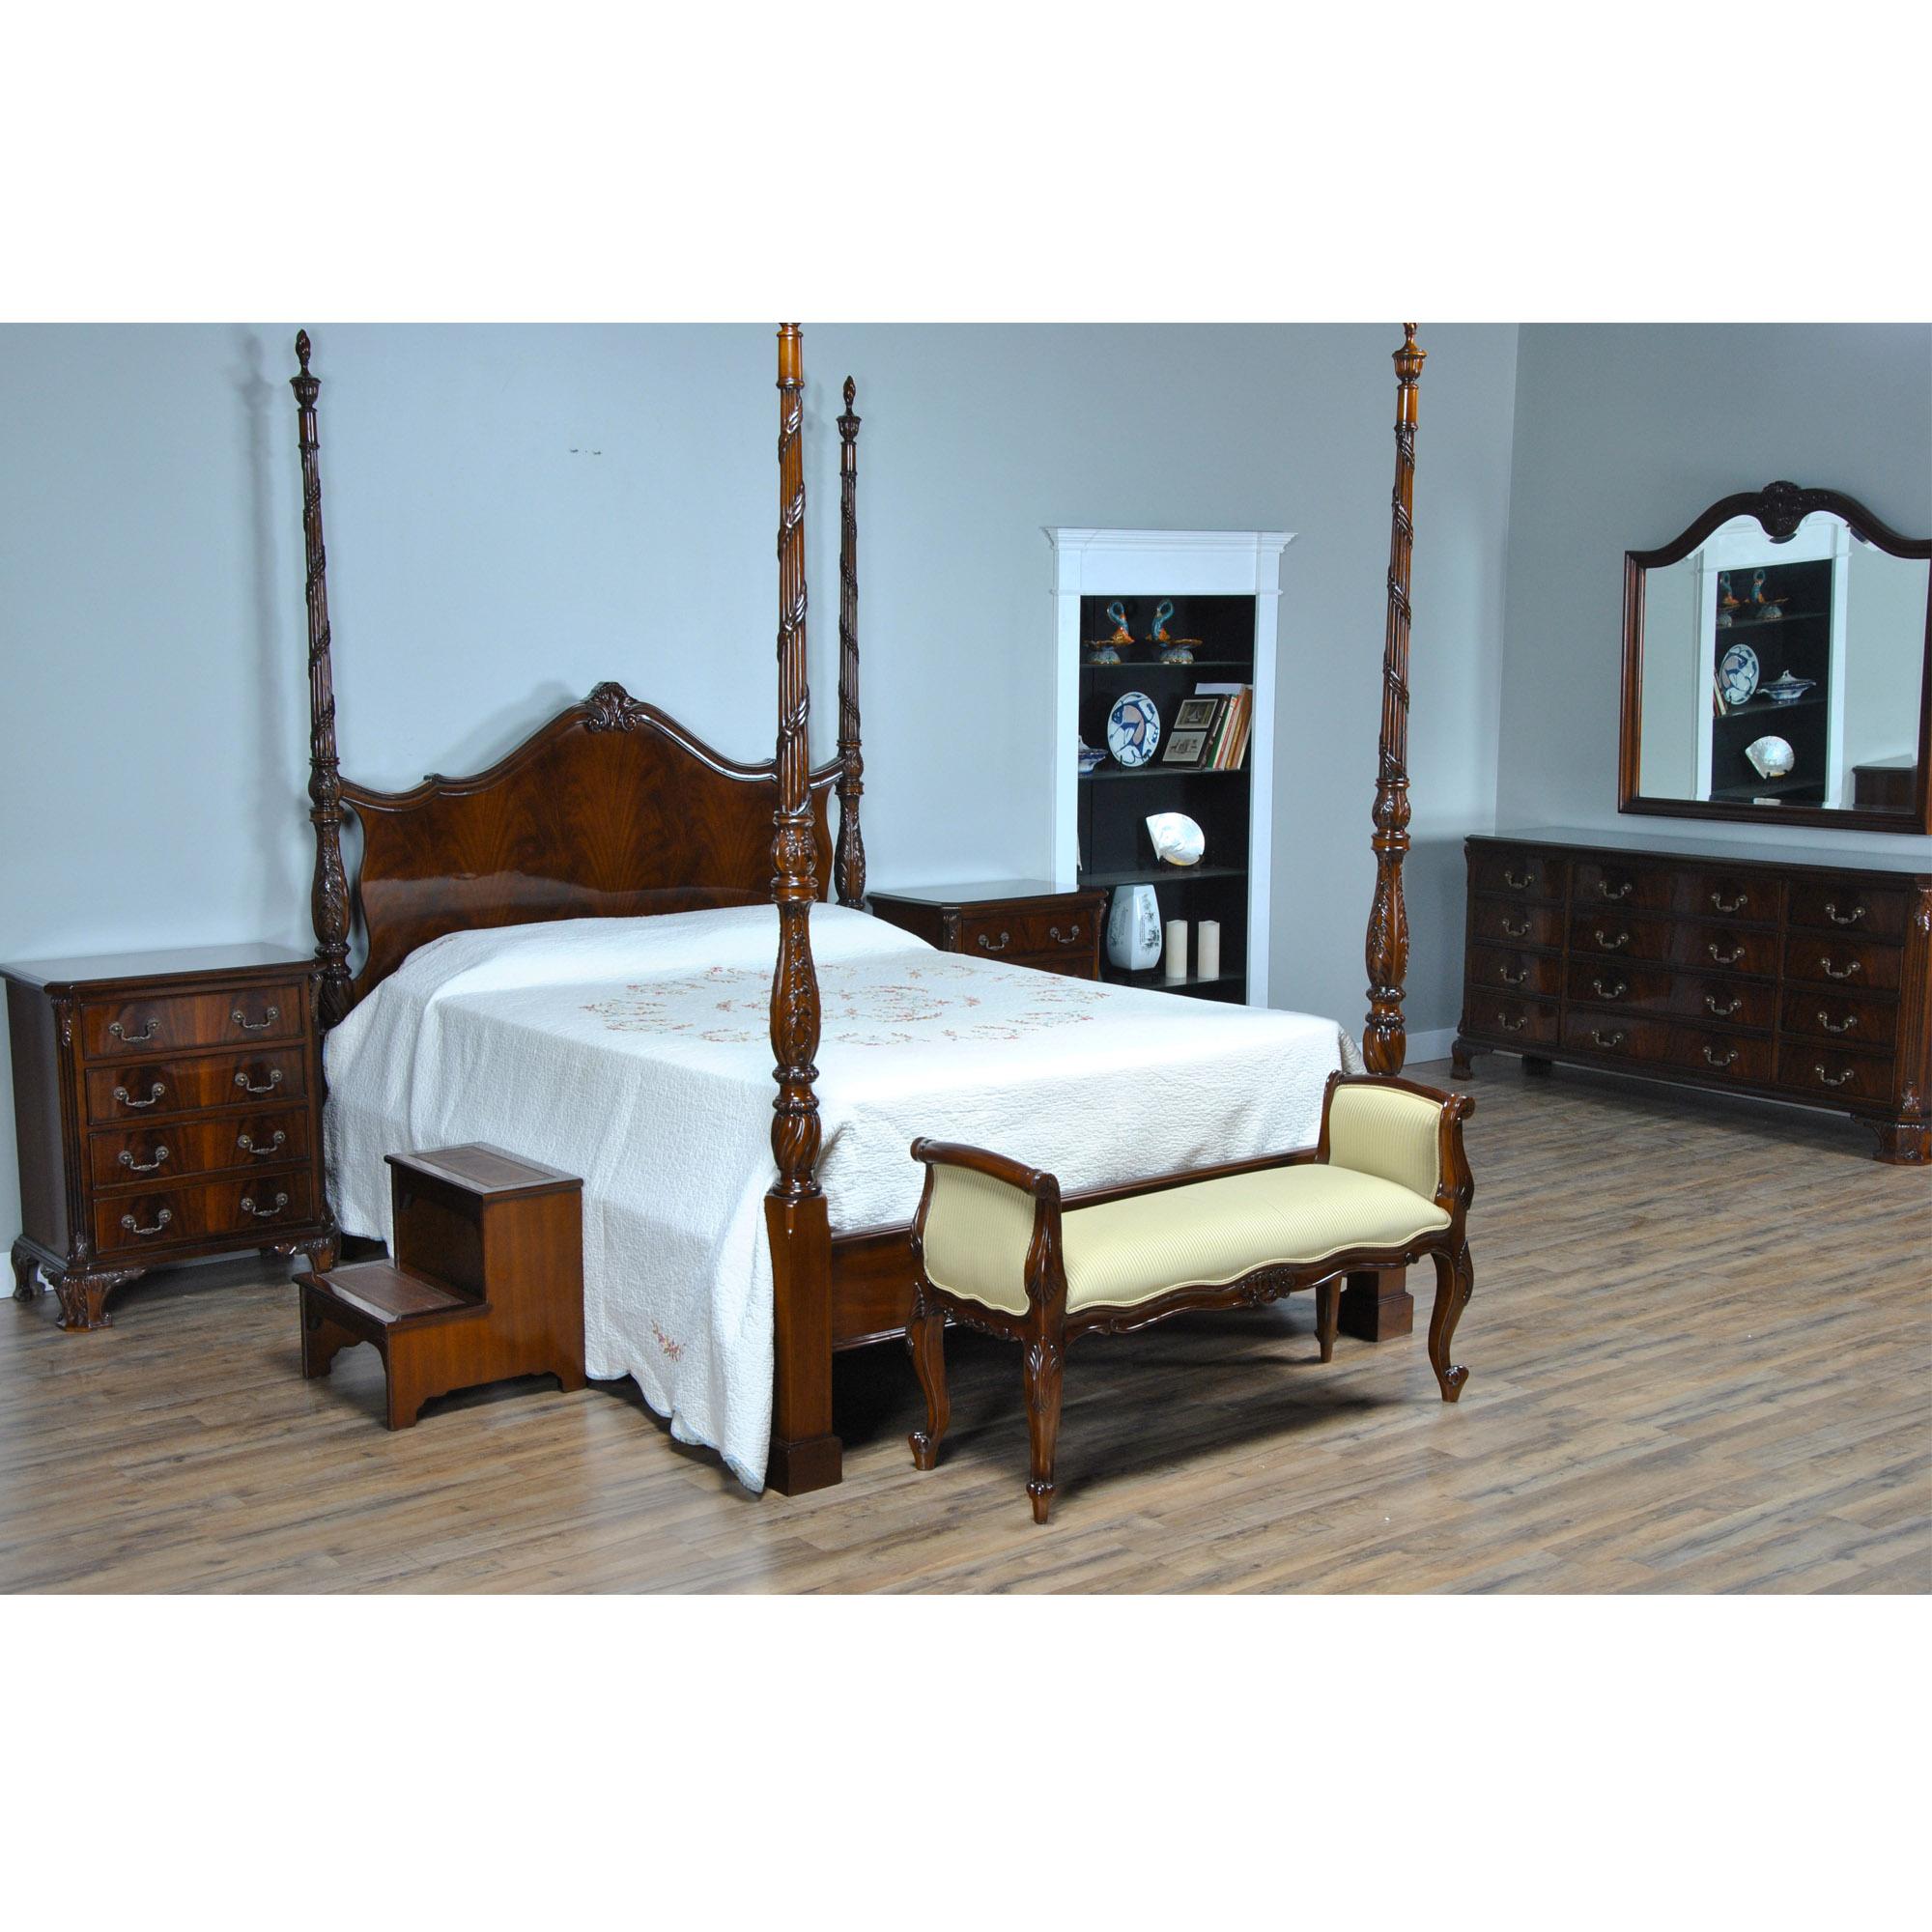 A wonderful Mahogany Queen Size Four Poster Bed. A high quality Four Poster Mahogany Queen Size Bed with Hand Carved Flame Finial Posts. Each post unfastens for ease of transport and set up in the home. A Solid Mahogany Frame and the finest mahogany